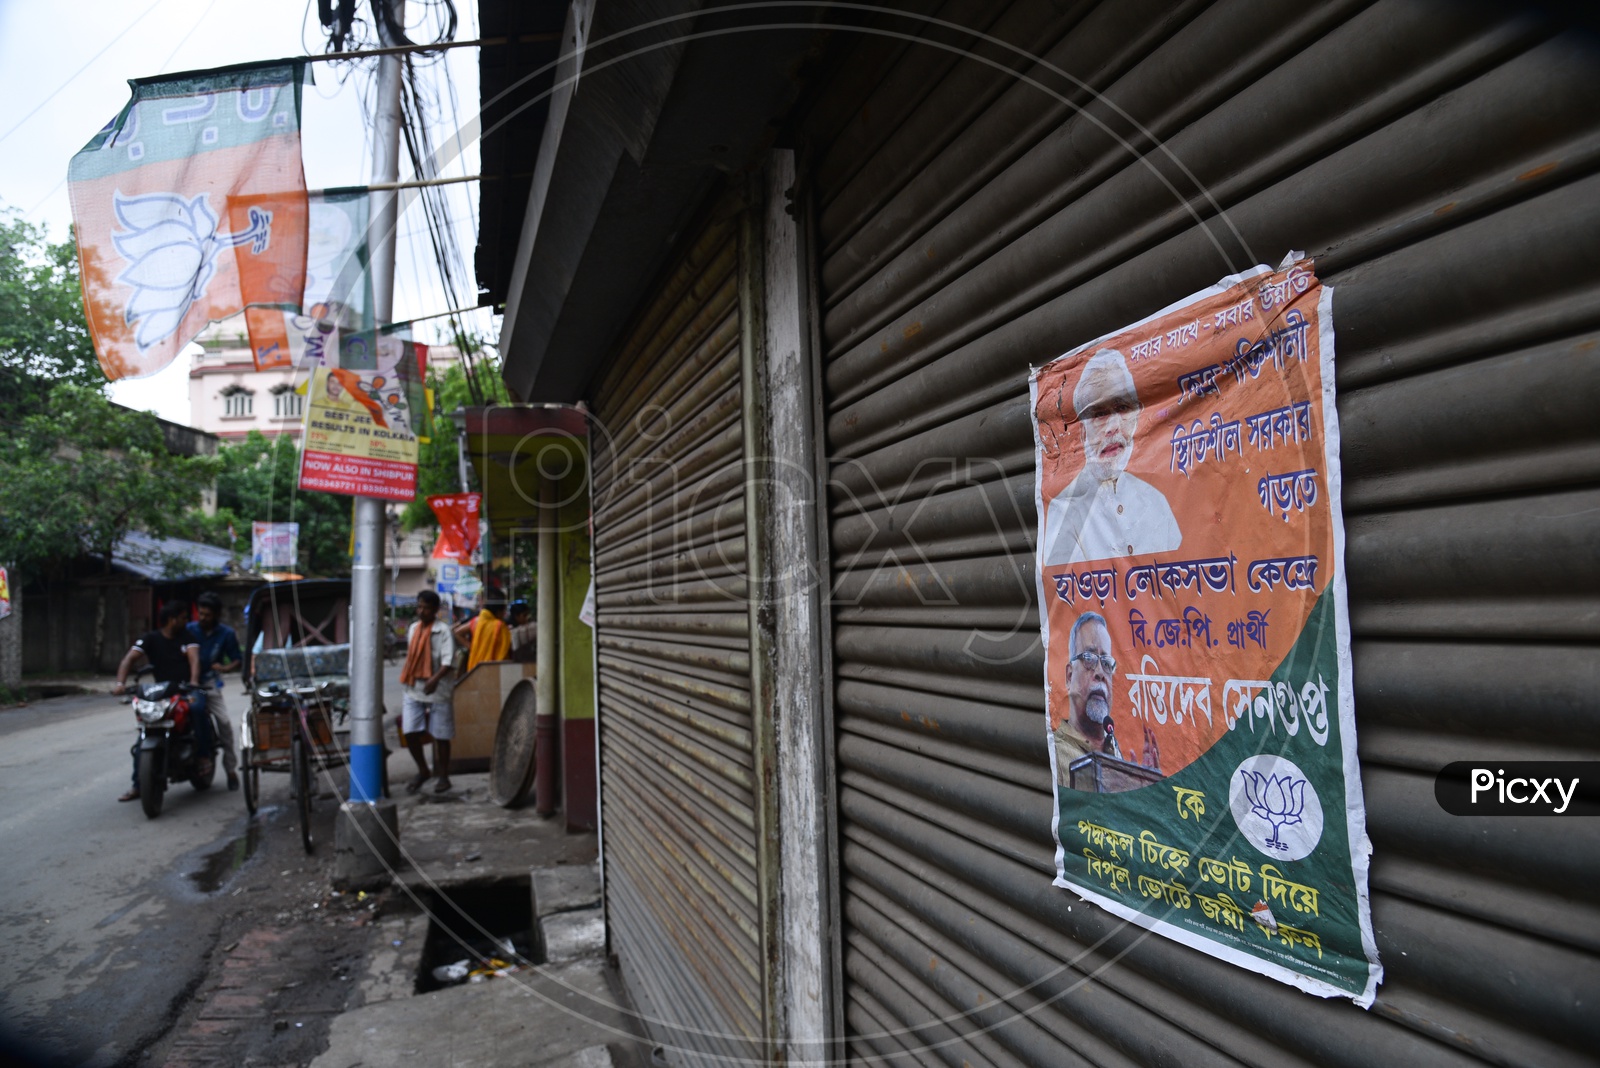 BJP Or  Modi  Posters Pasted On The  Walls Of Kolkata As a Part Of Election Campaign For  Lok sabha General Elections 2019 in West Bengal